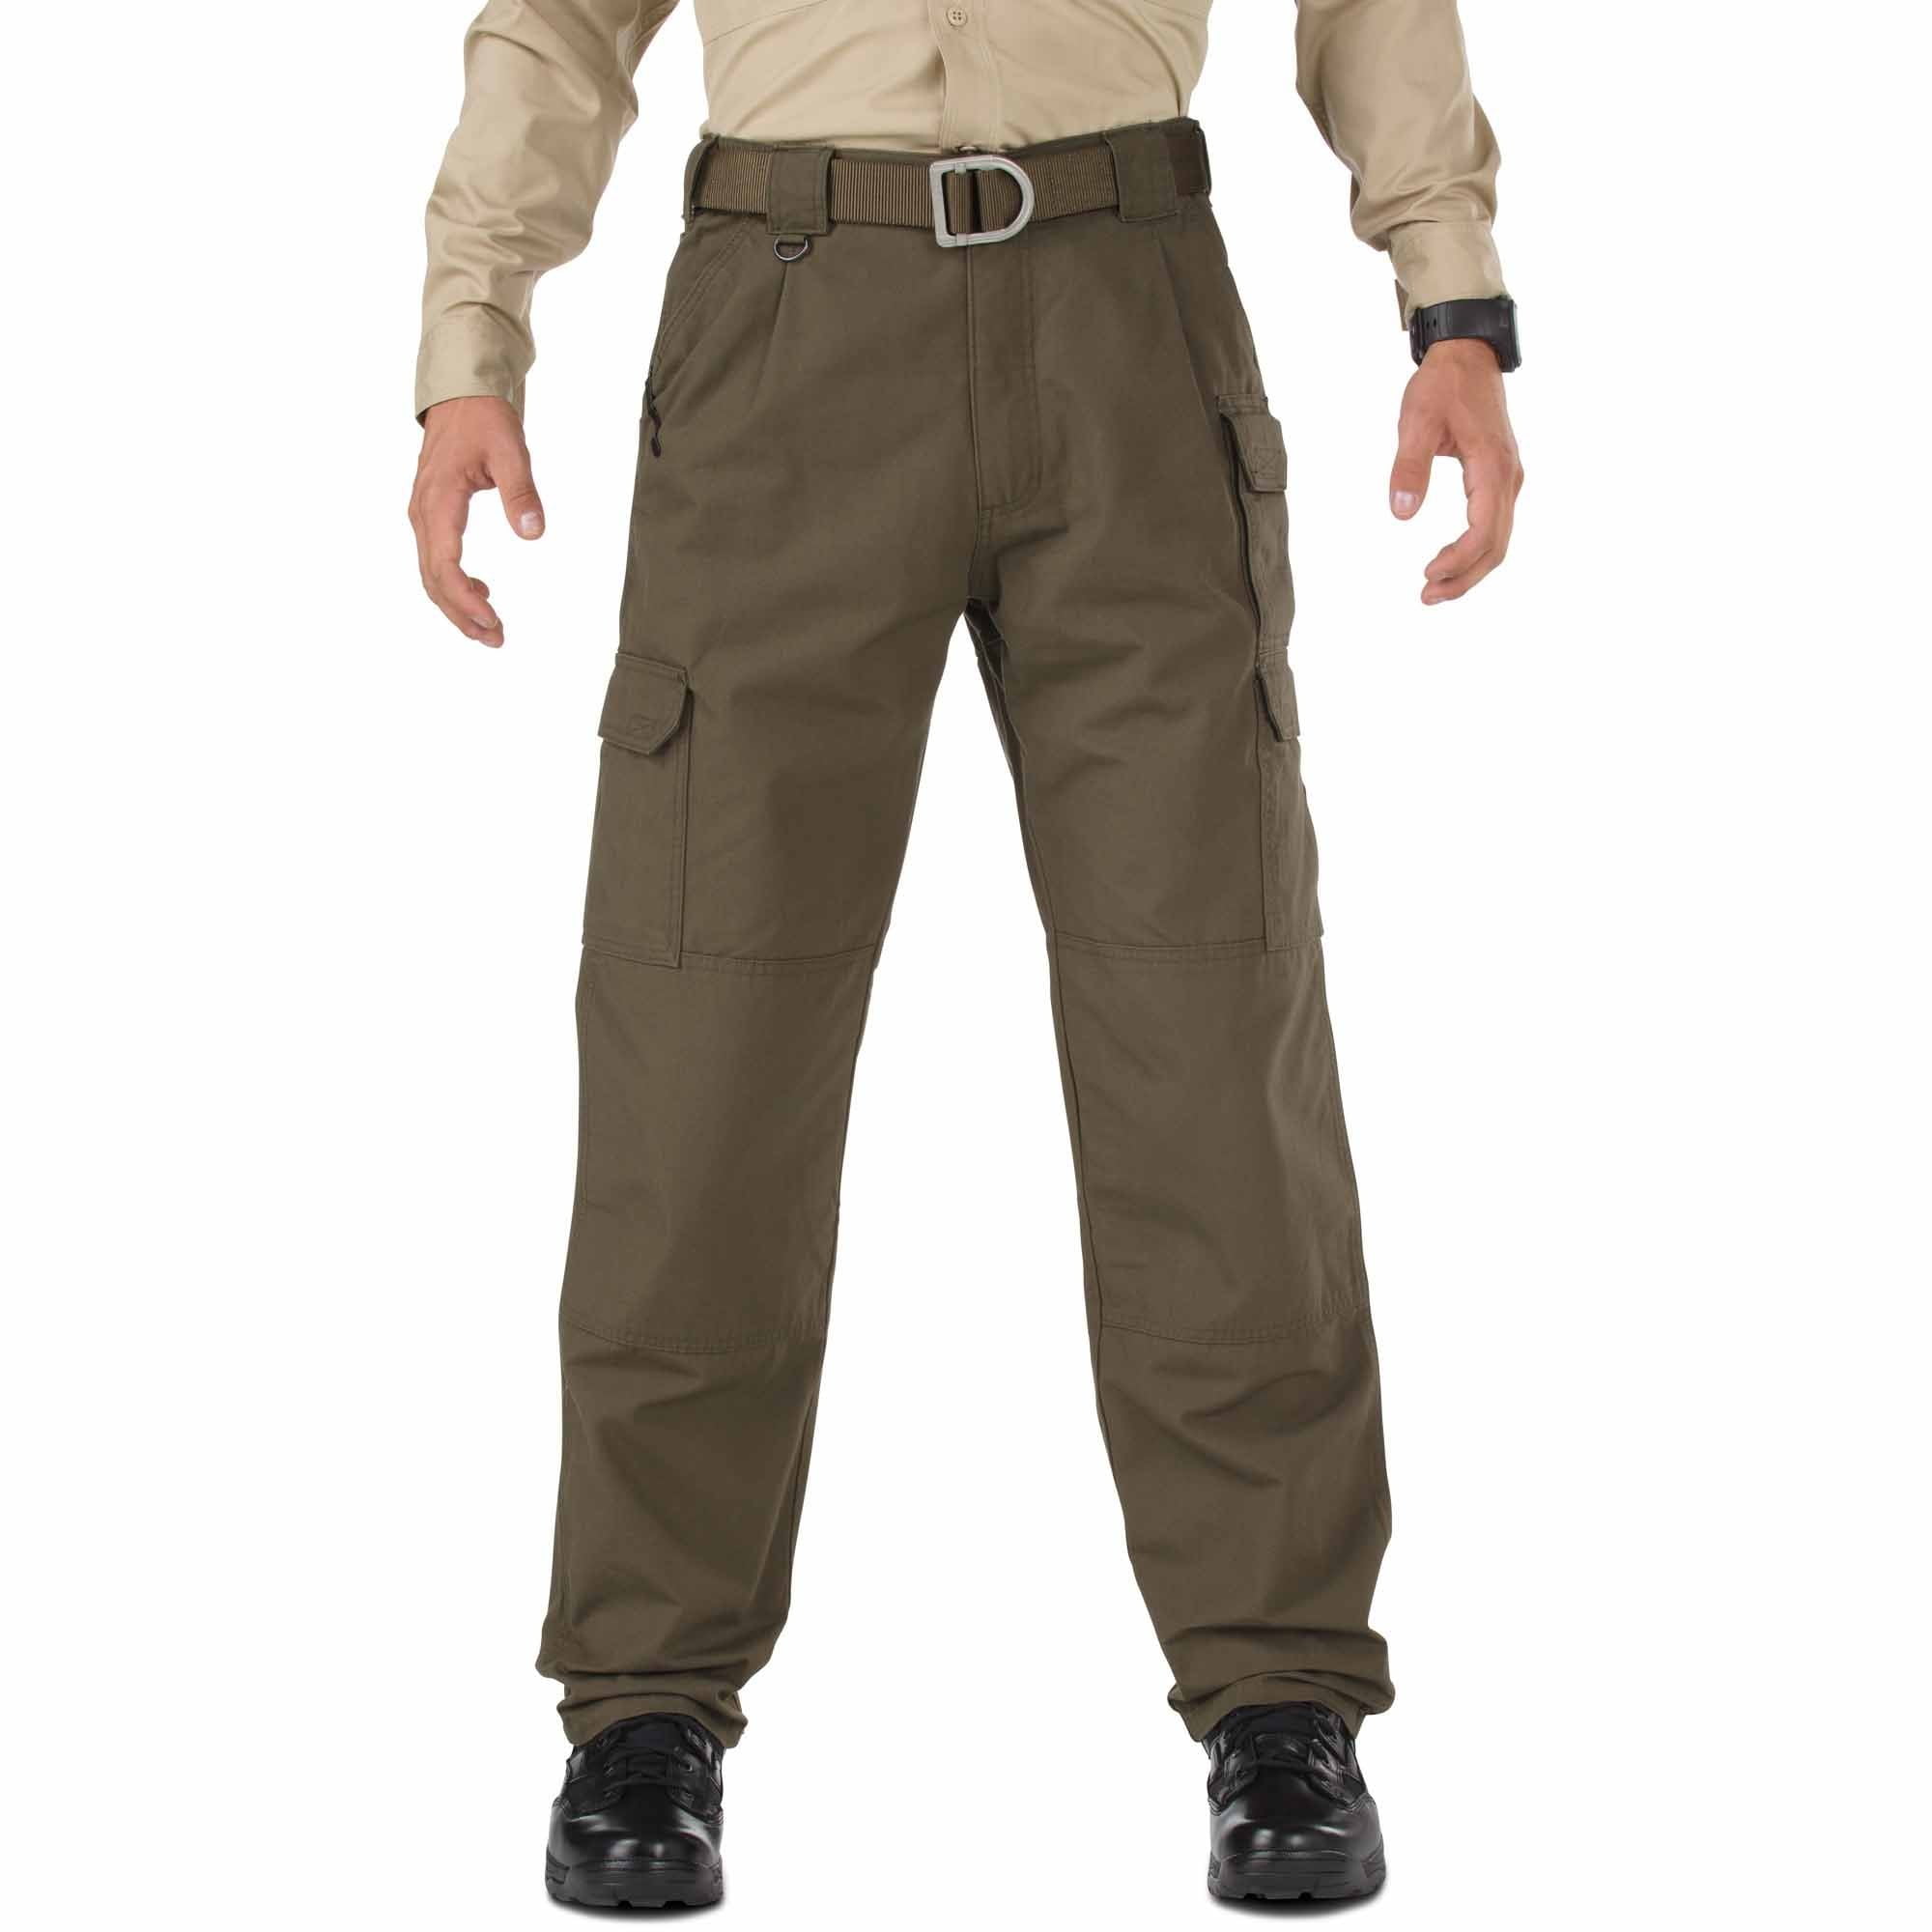 100% Authentic NEW 5.11 Men's Tactical Pants 74251 in Different Colors & Sizes 